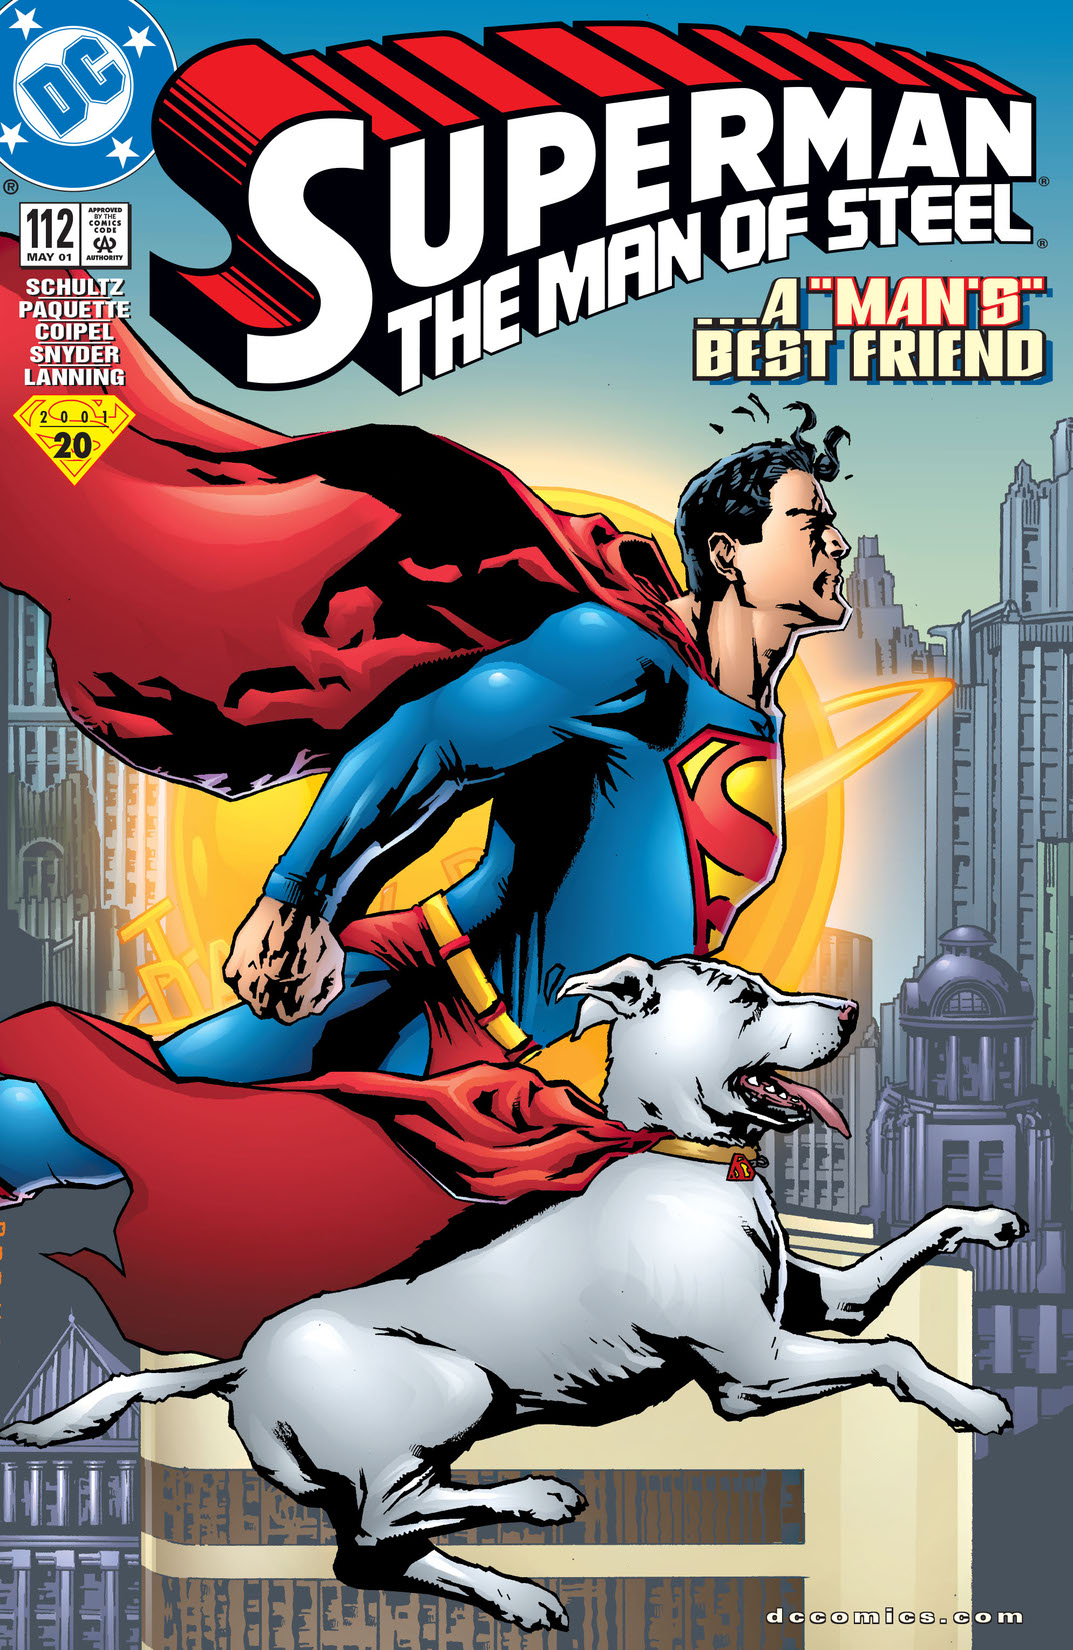 Superman: The Man of Steel #112 preview images